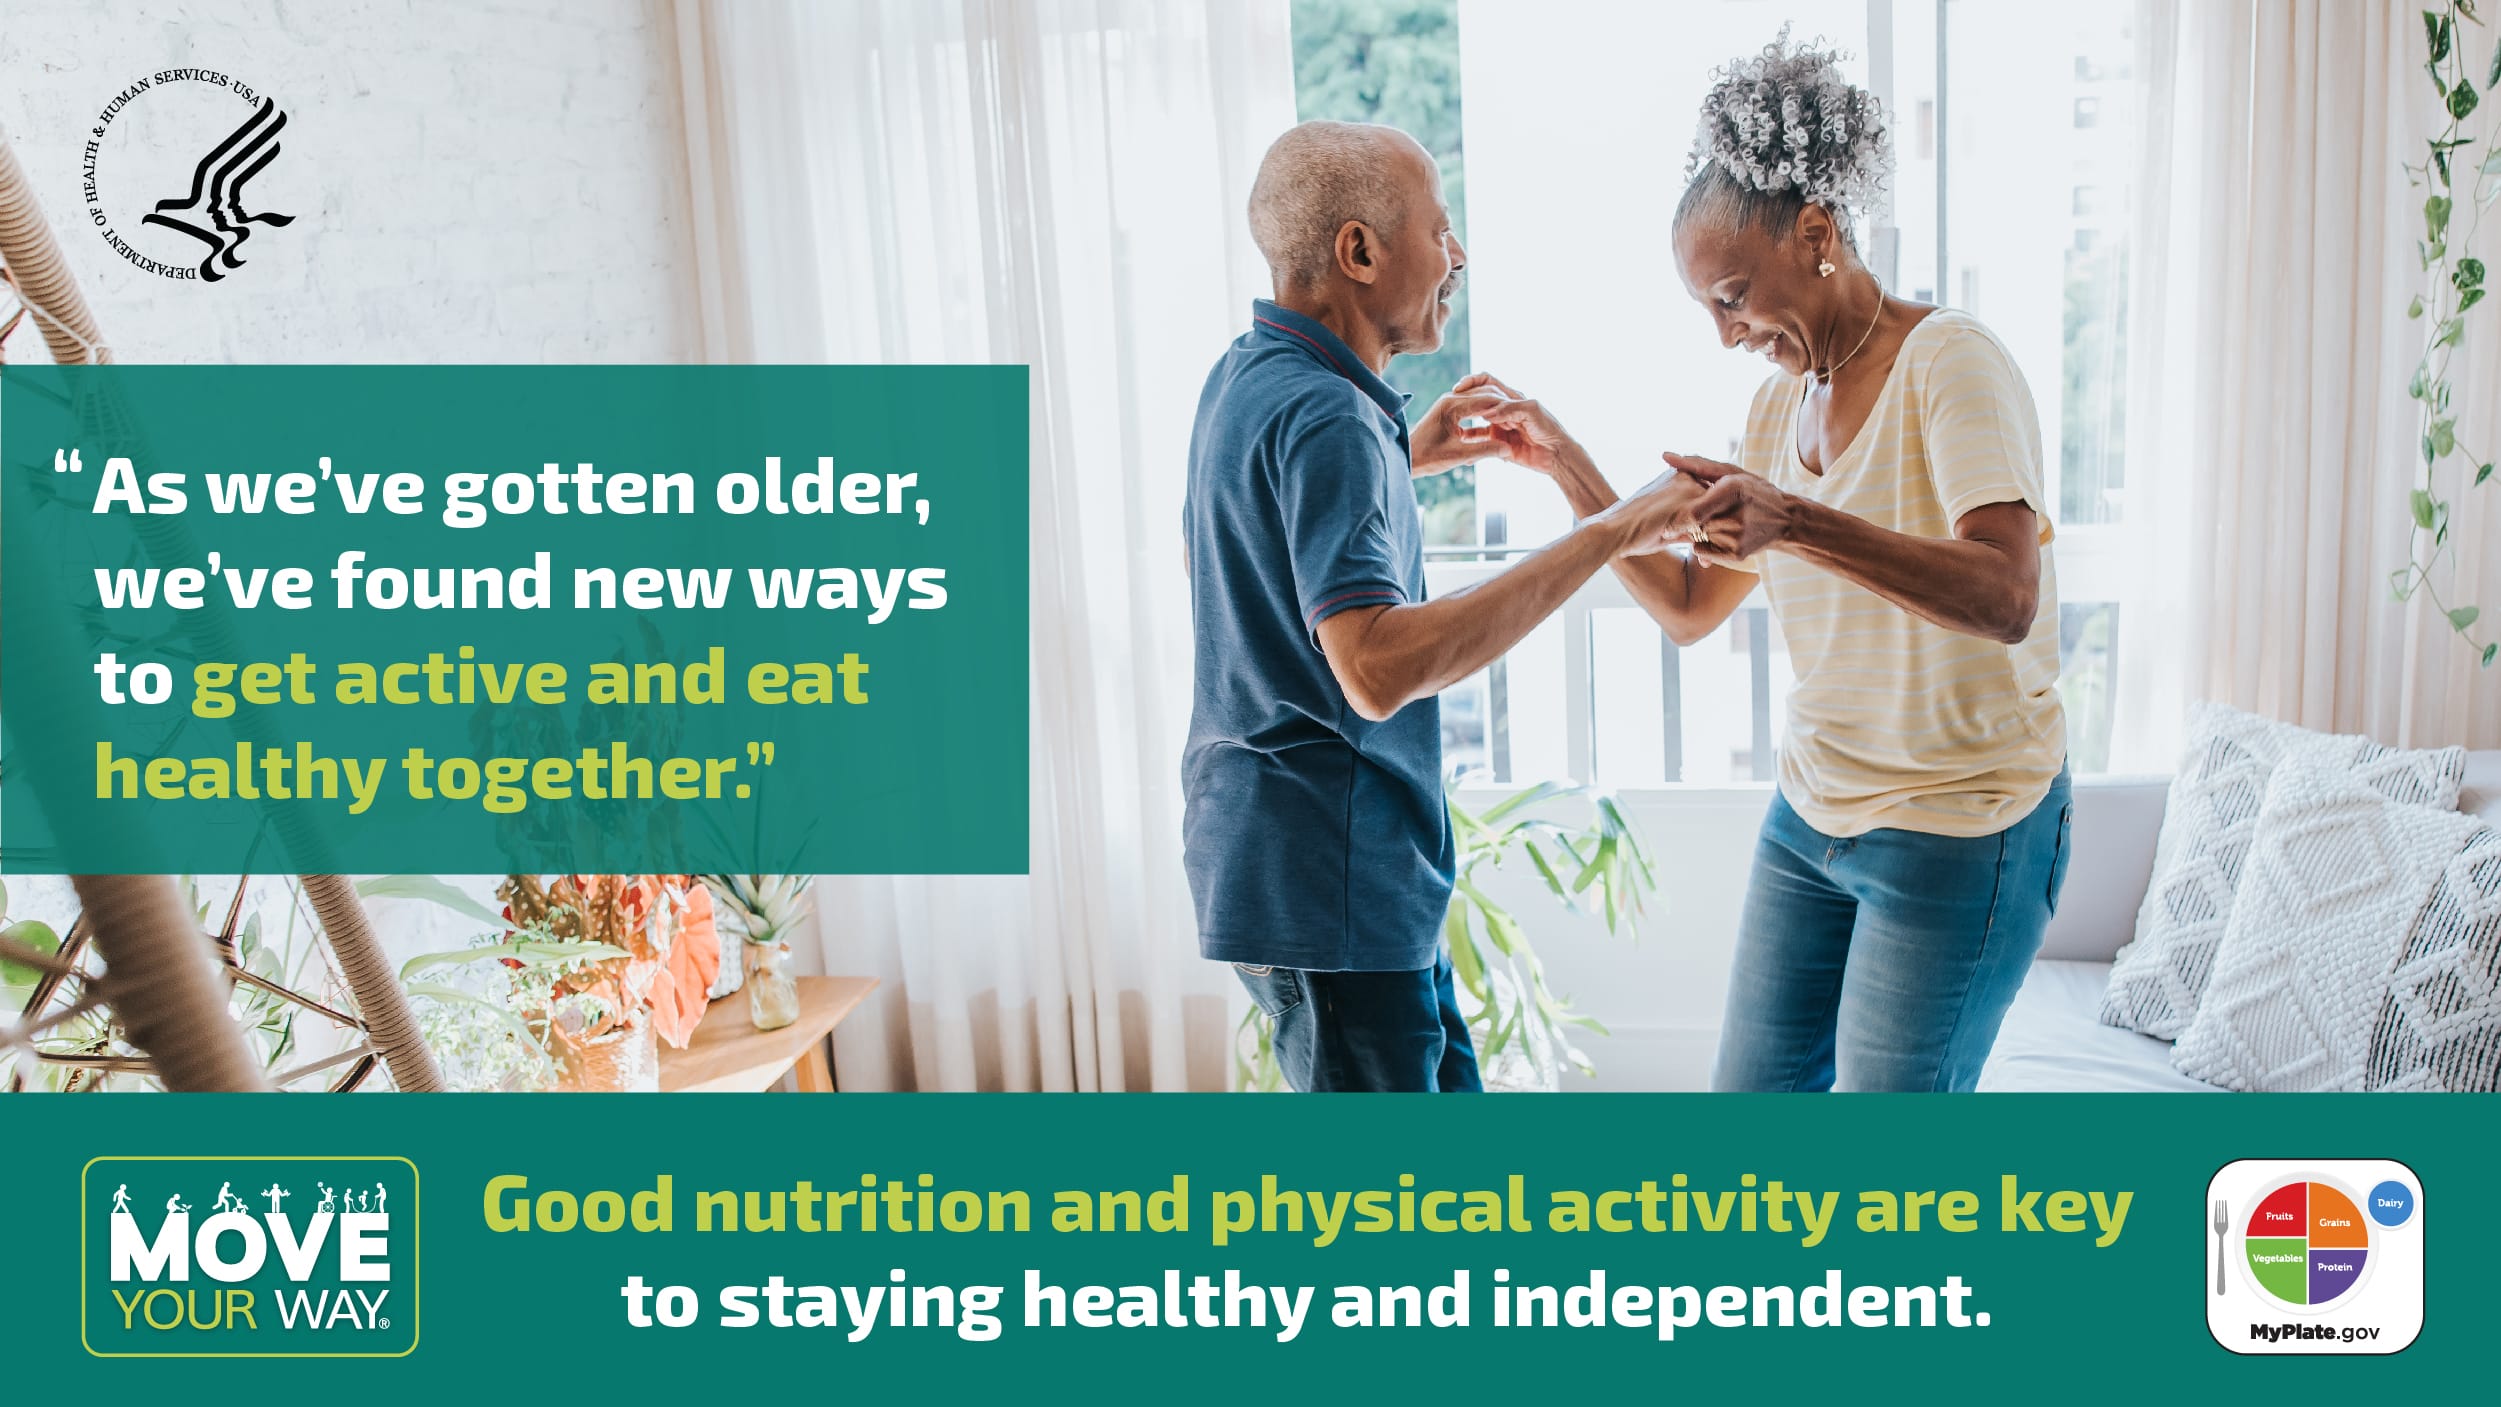 An older couple dances in their home, a quote reads "As we've gotten older, we've found new ways to get active and eat healthy together."